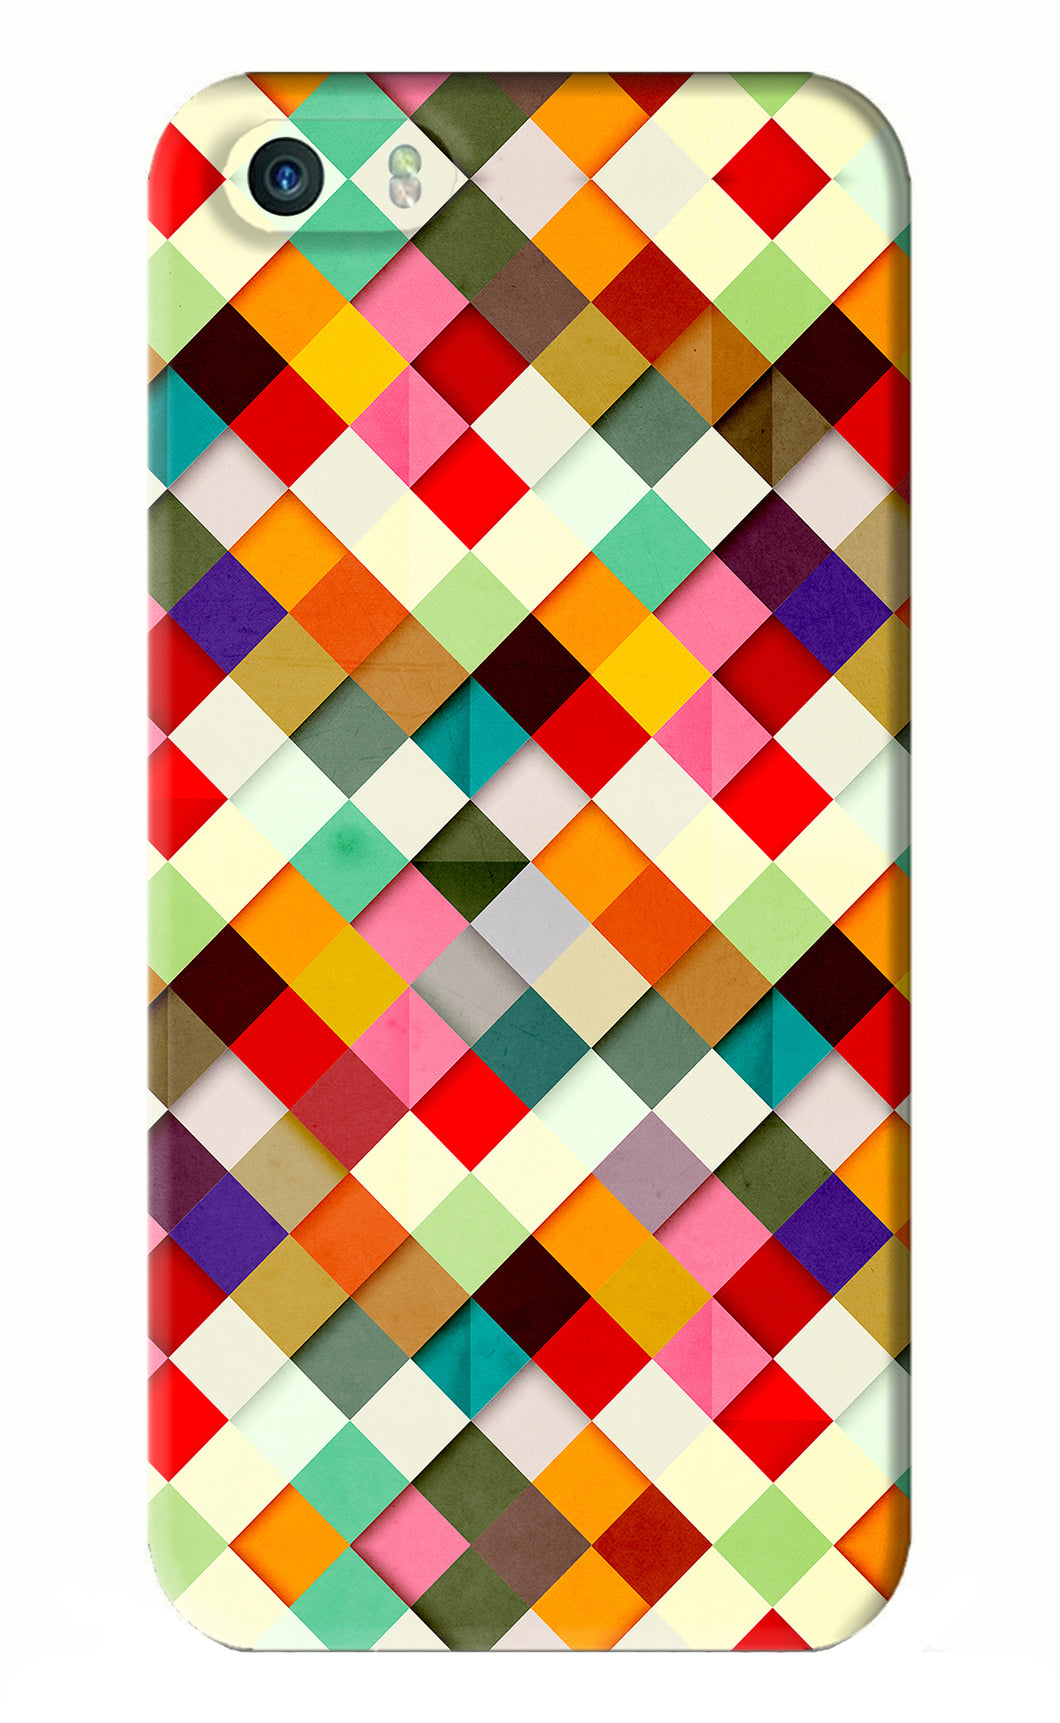 Geometric Abstract Colorful iPhone 5S Back Skin Wrap